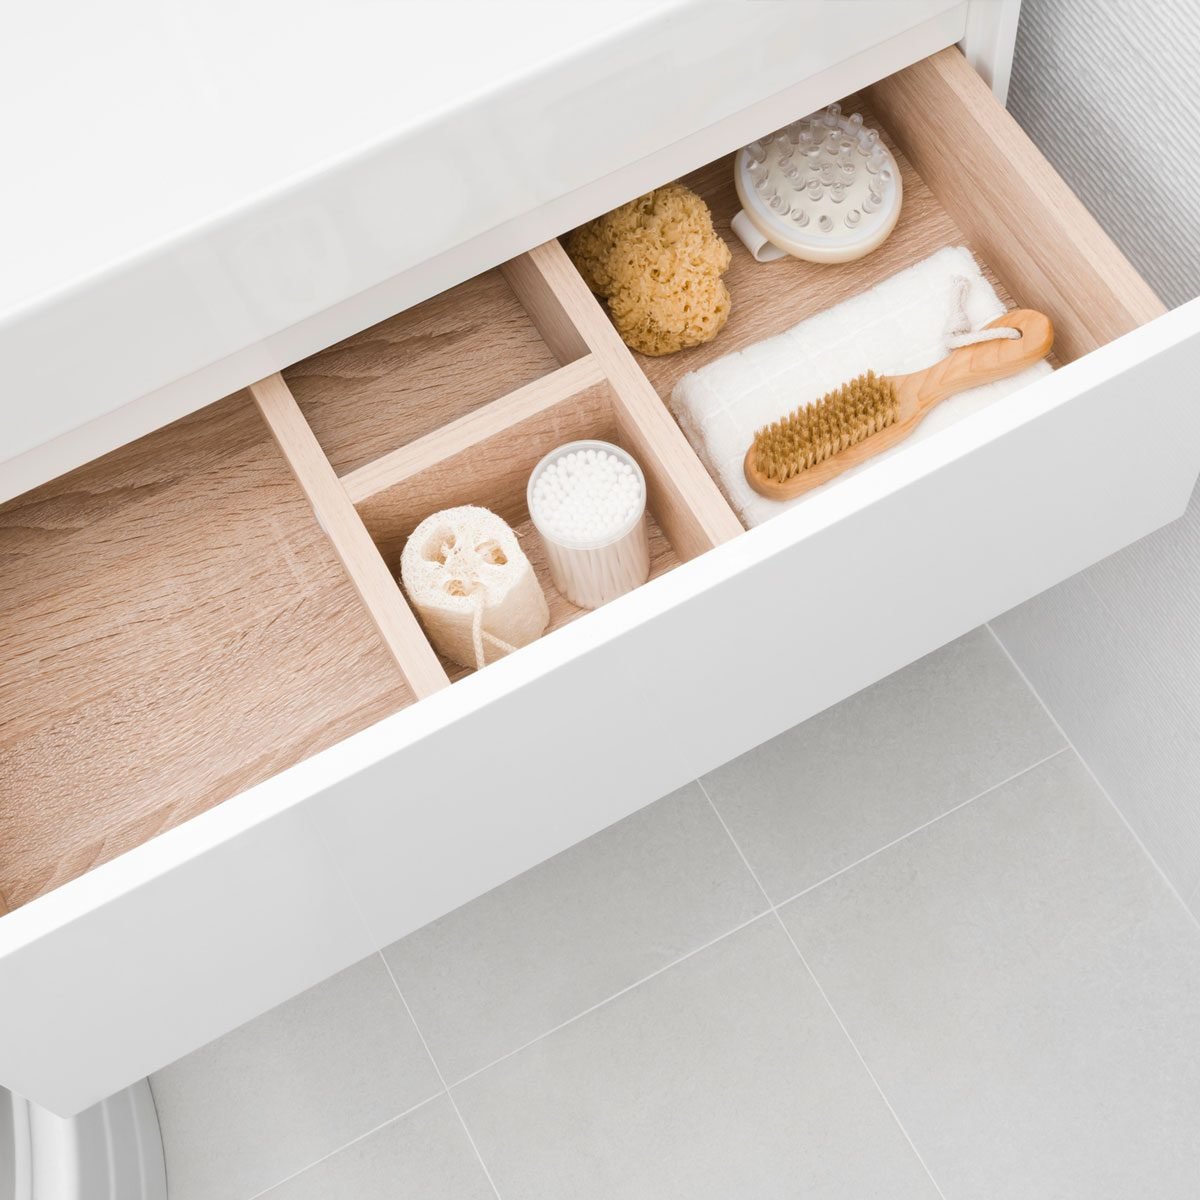 Bathroom Drawer Organizers and Dividers: Top Ideas & Tips for Better Storage